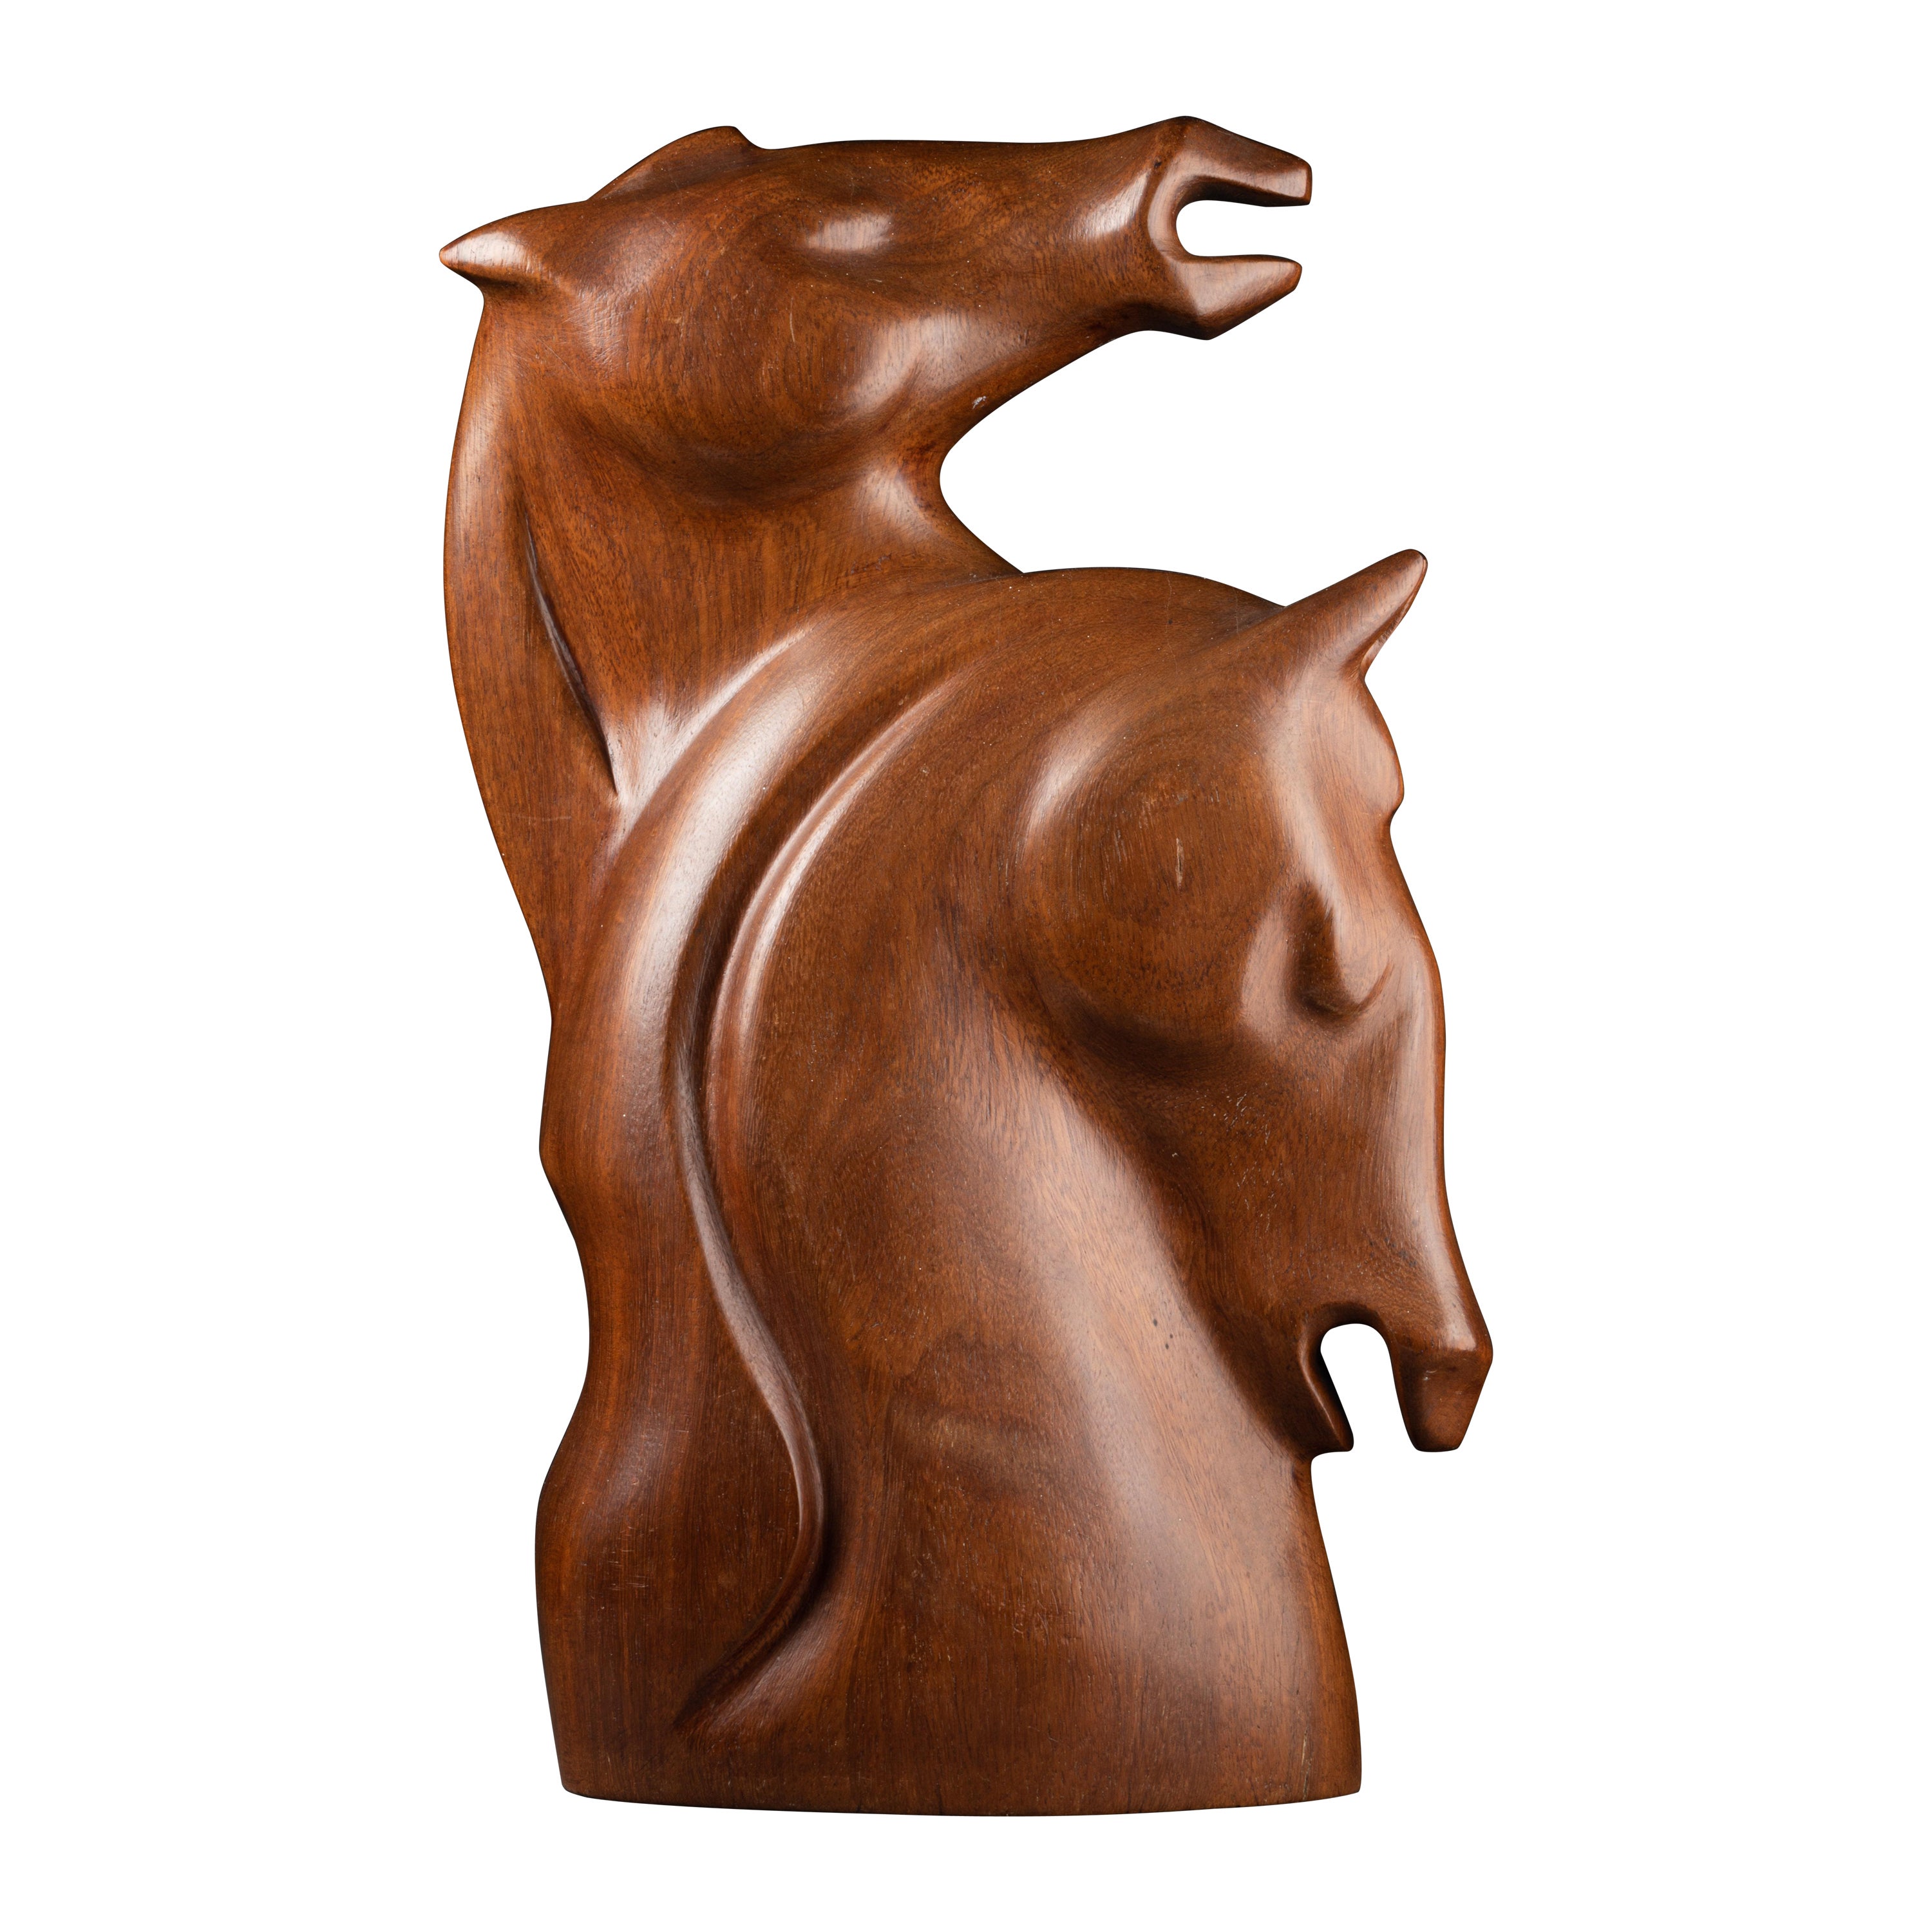 Max Meder (1937-) : "Couple of horses bust", wood sculpture C. For Sale